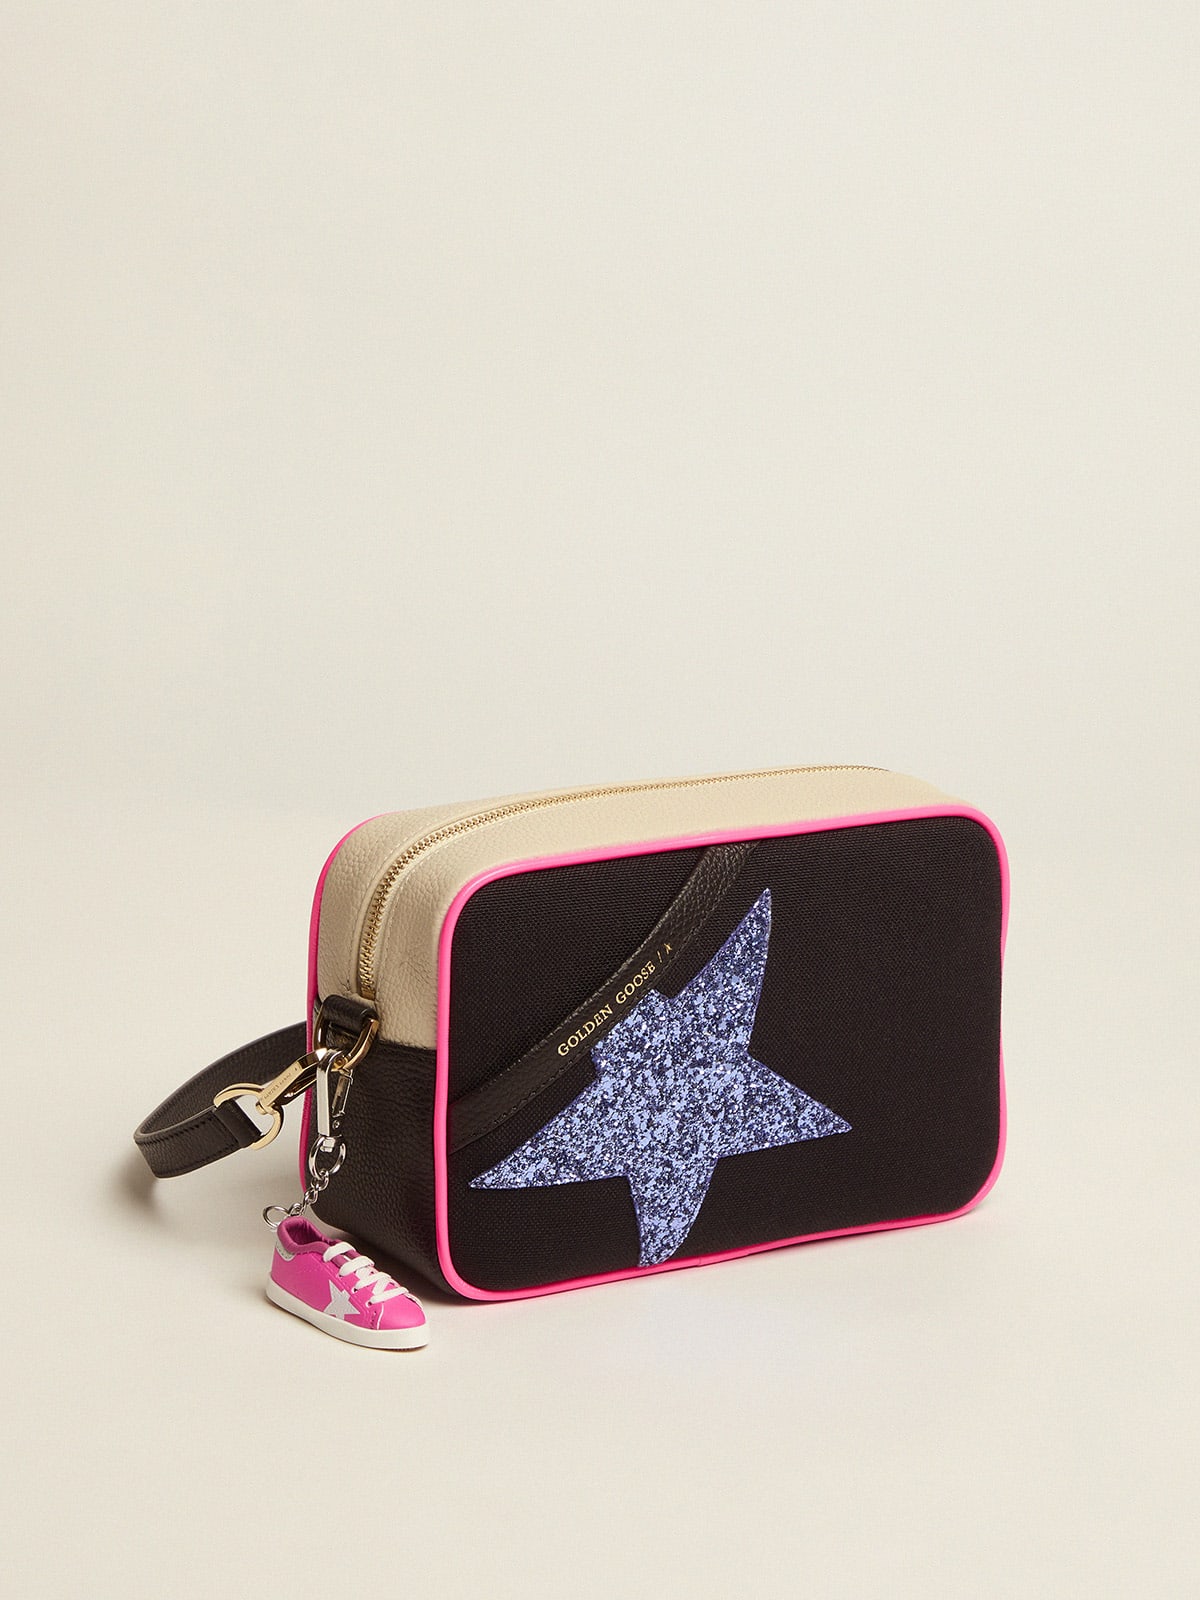 Golden Goose - Star Bag in canvas with inserts in white milk hammered leather and purple glitter star in 